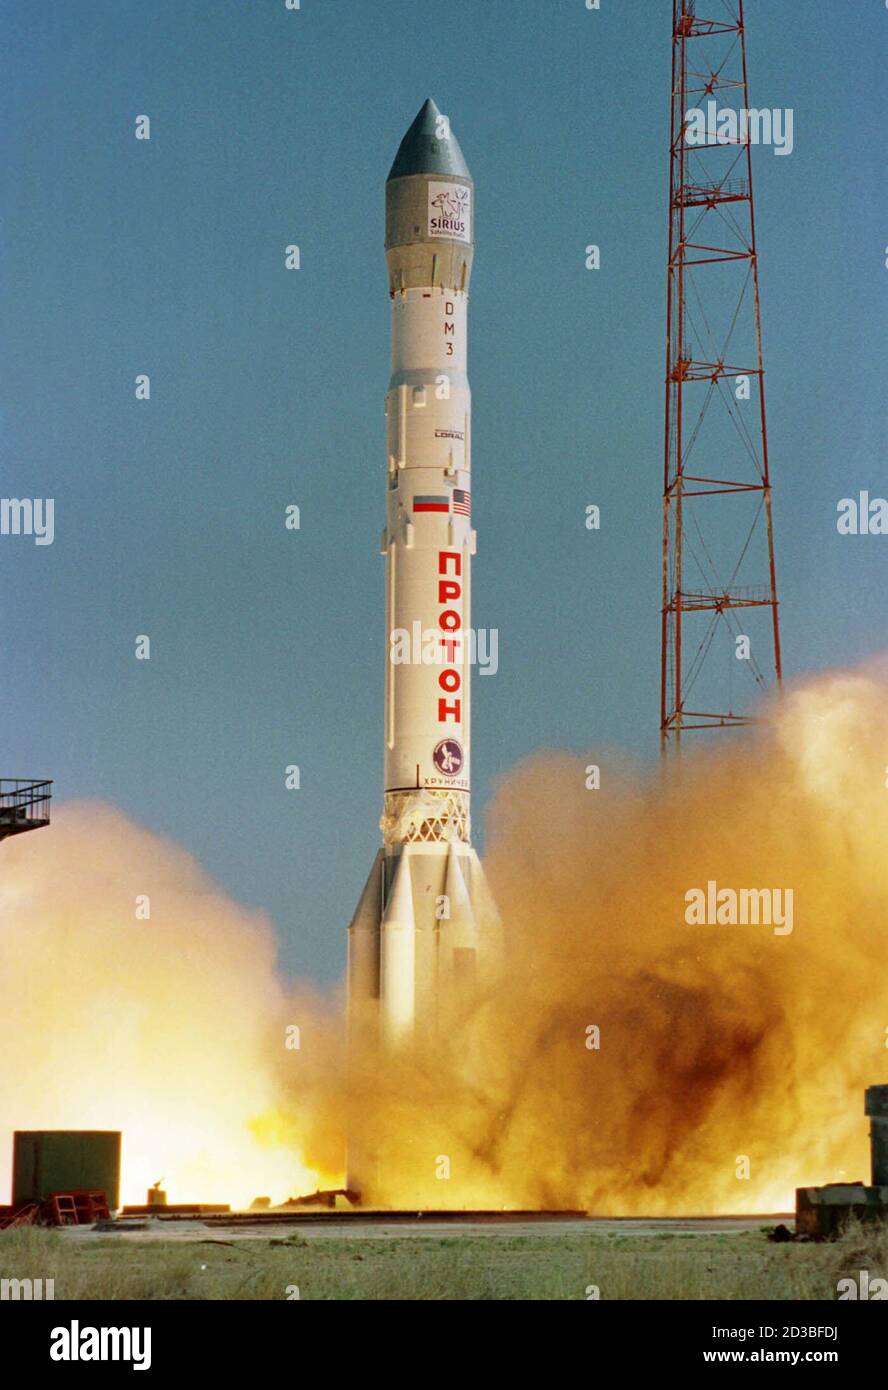 The sixteenth launch of the Proton for International Launch Services  carrying the Sirius 2 satellite lifts of its launch pad from Baikonur  Kazakhstan on September 5, 2000. The spacecraft built by Space